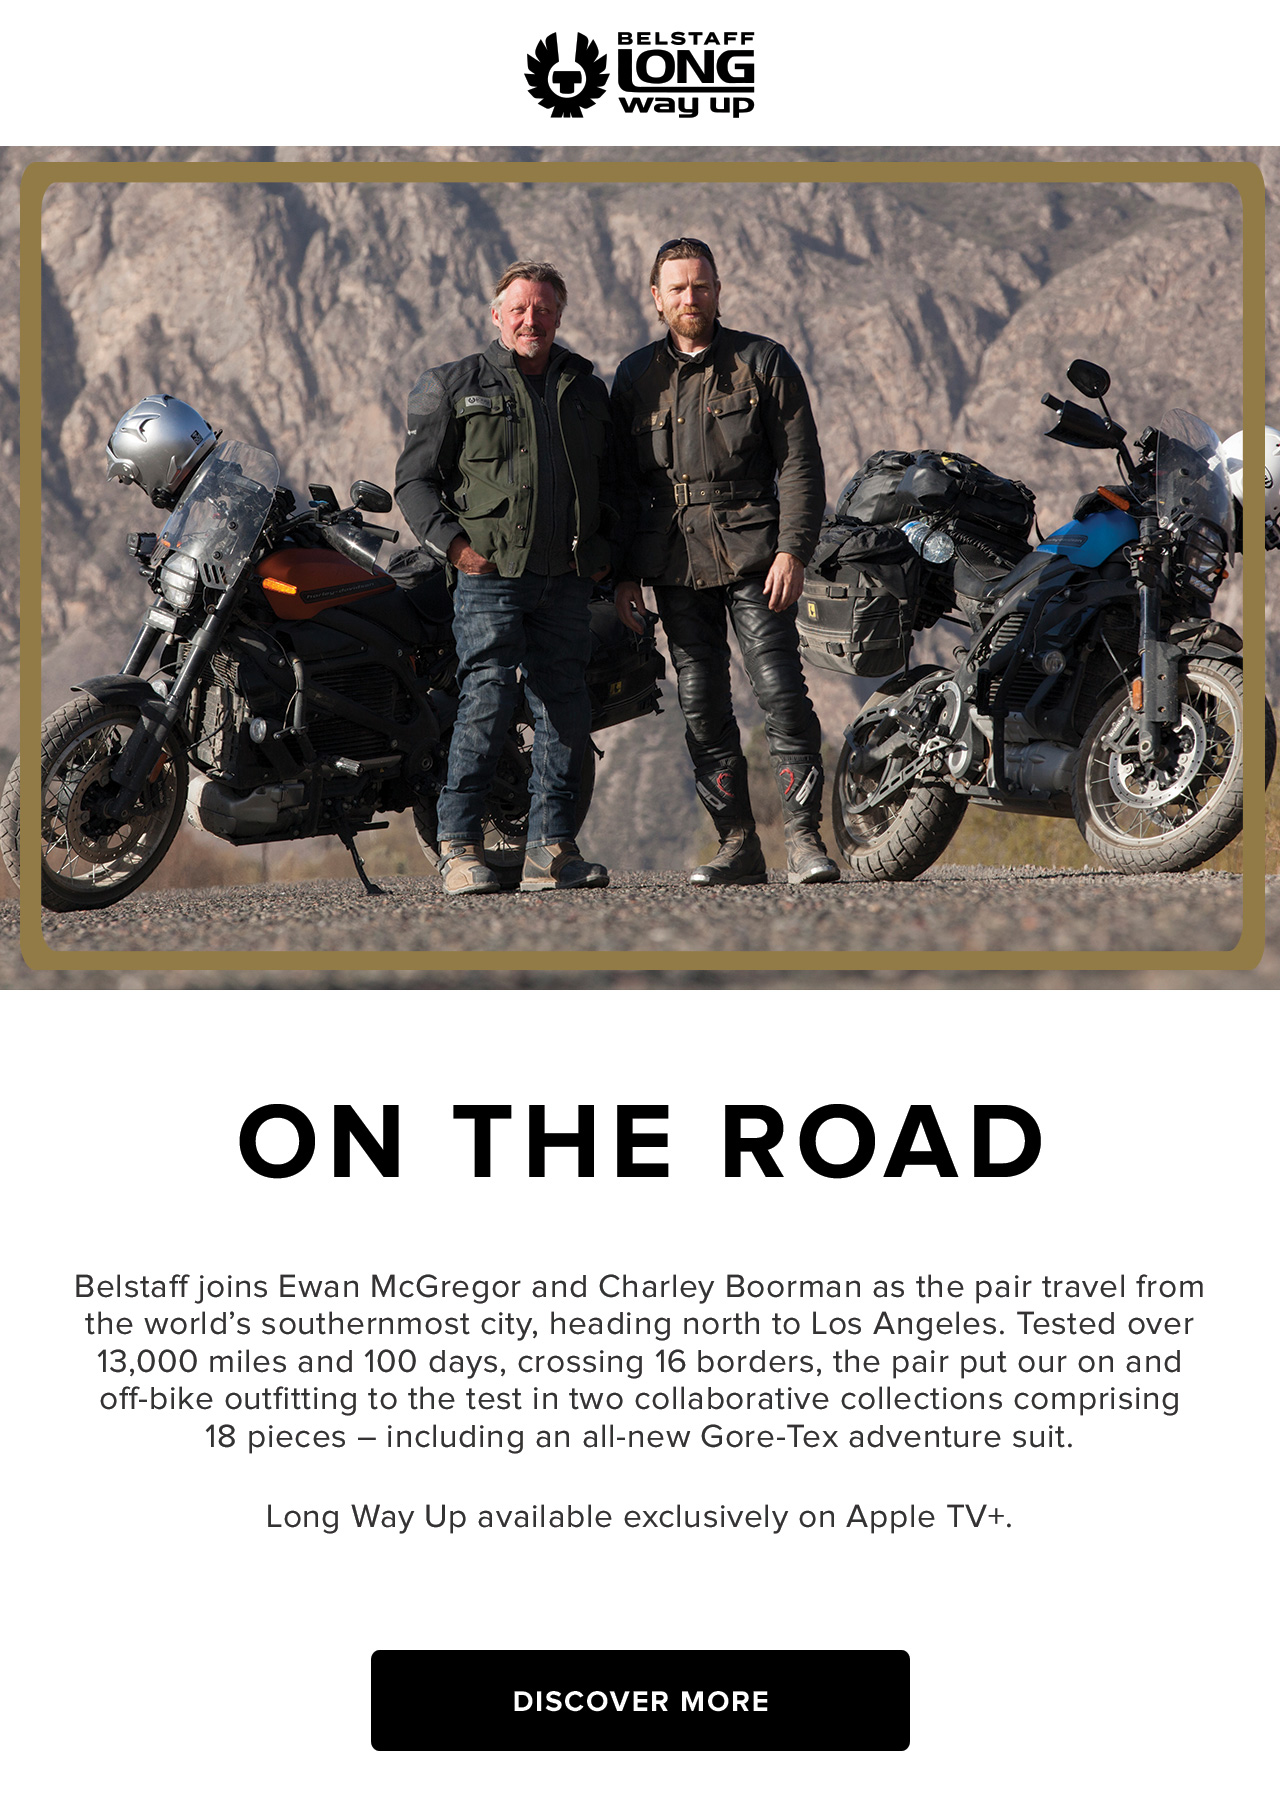 Belstaff joins Ewan McGregor and Charley Boorman as the pair travel from the worlds southernmost city, heading north to Los Angeles. Tested over 13,000 miles and 100 days, crossing 16 borders, the pair put our on and off-bike outfitting to the test in two collaborative collections comprising 18 pieces - including an all-new Gore-Tex adventure suit. Long Way Up available exclusively on Apple TV+.